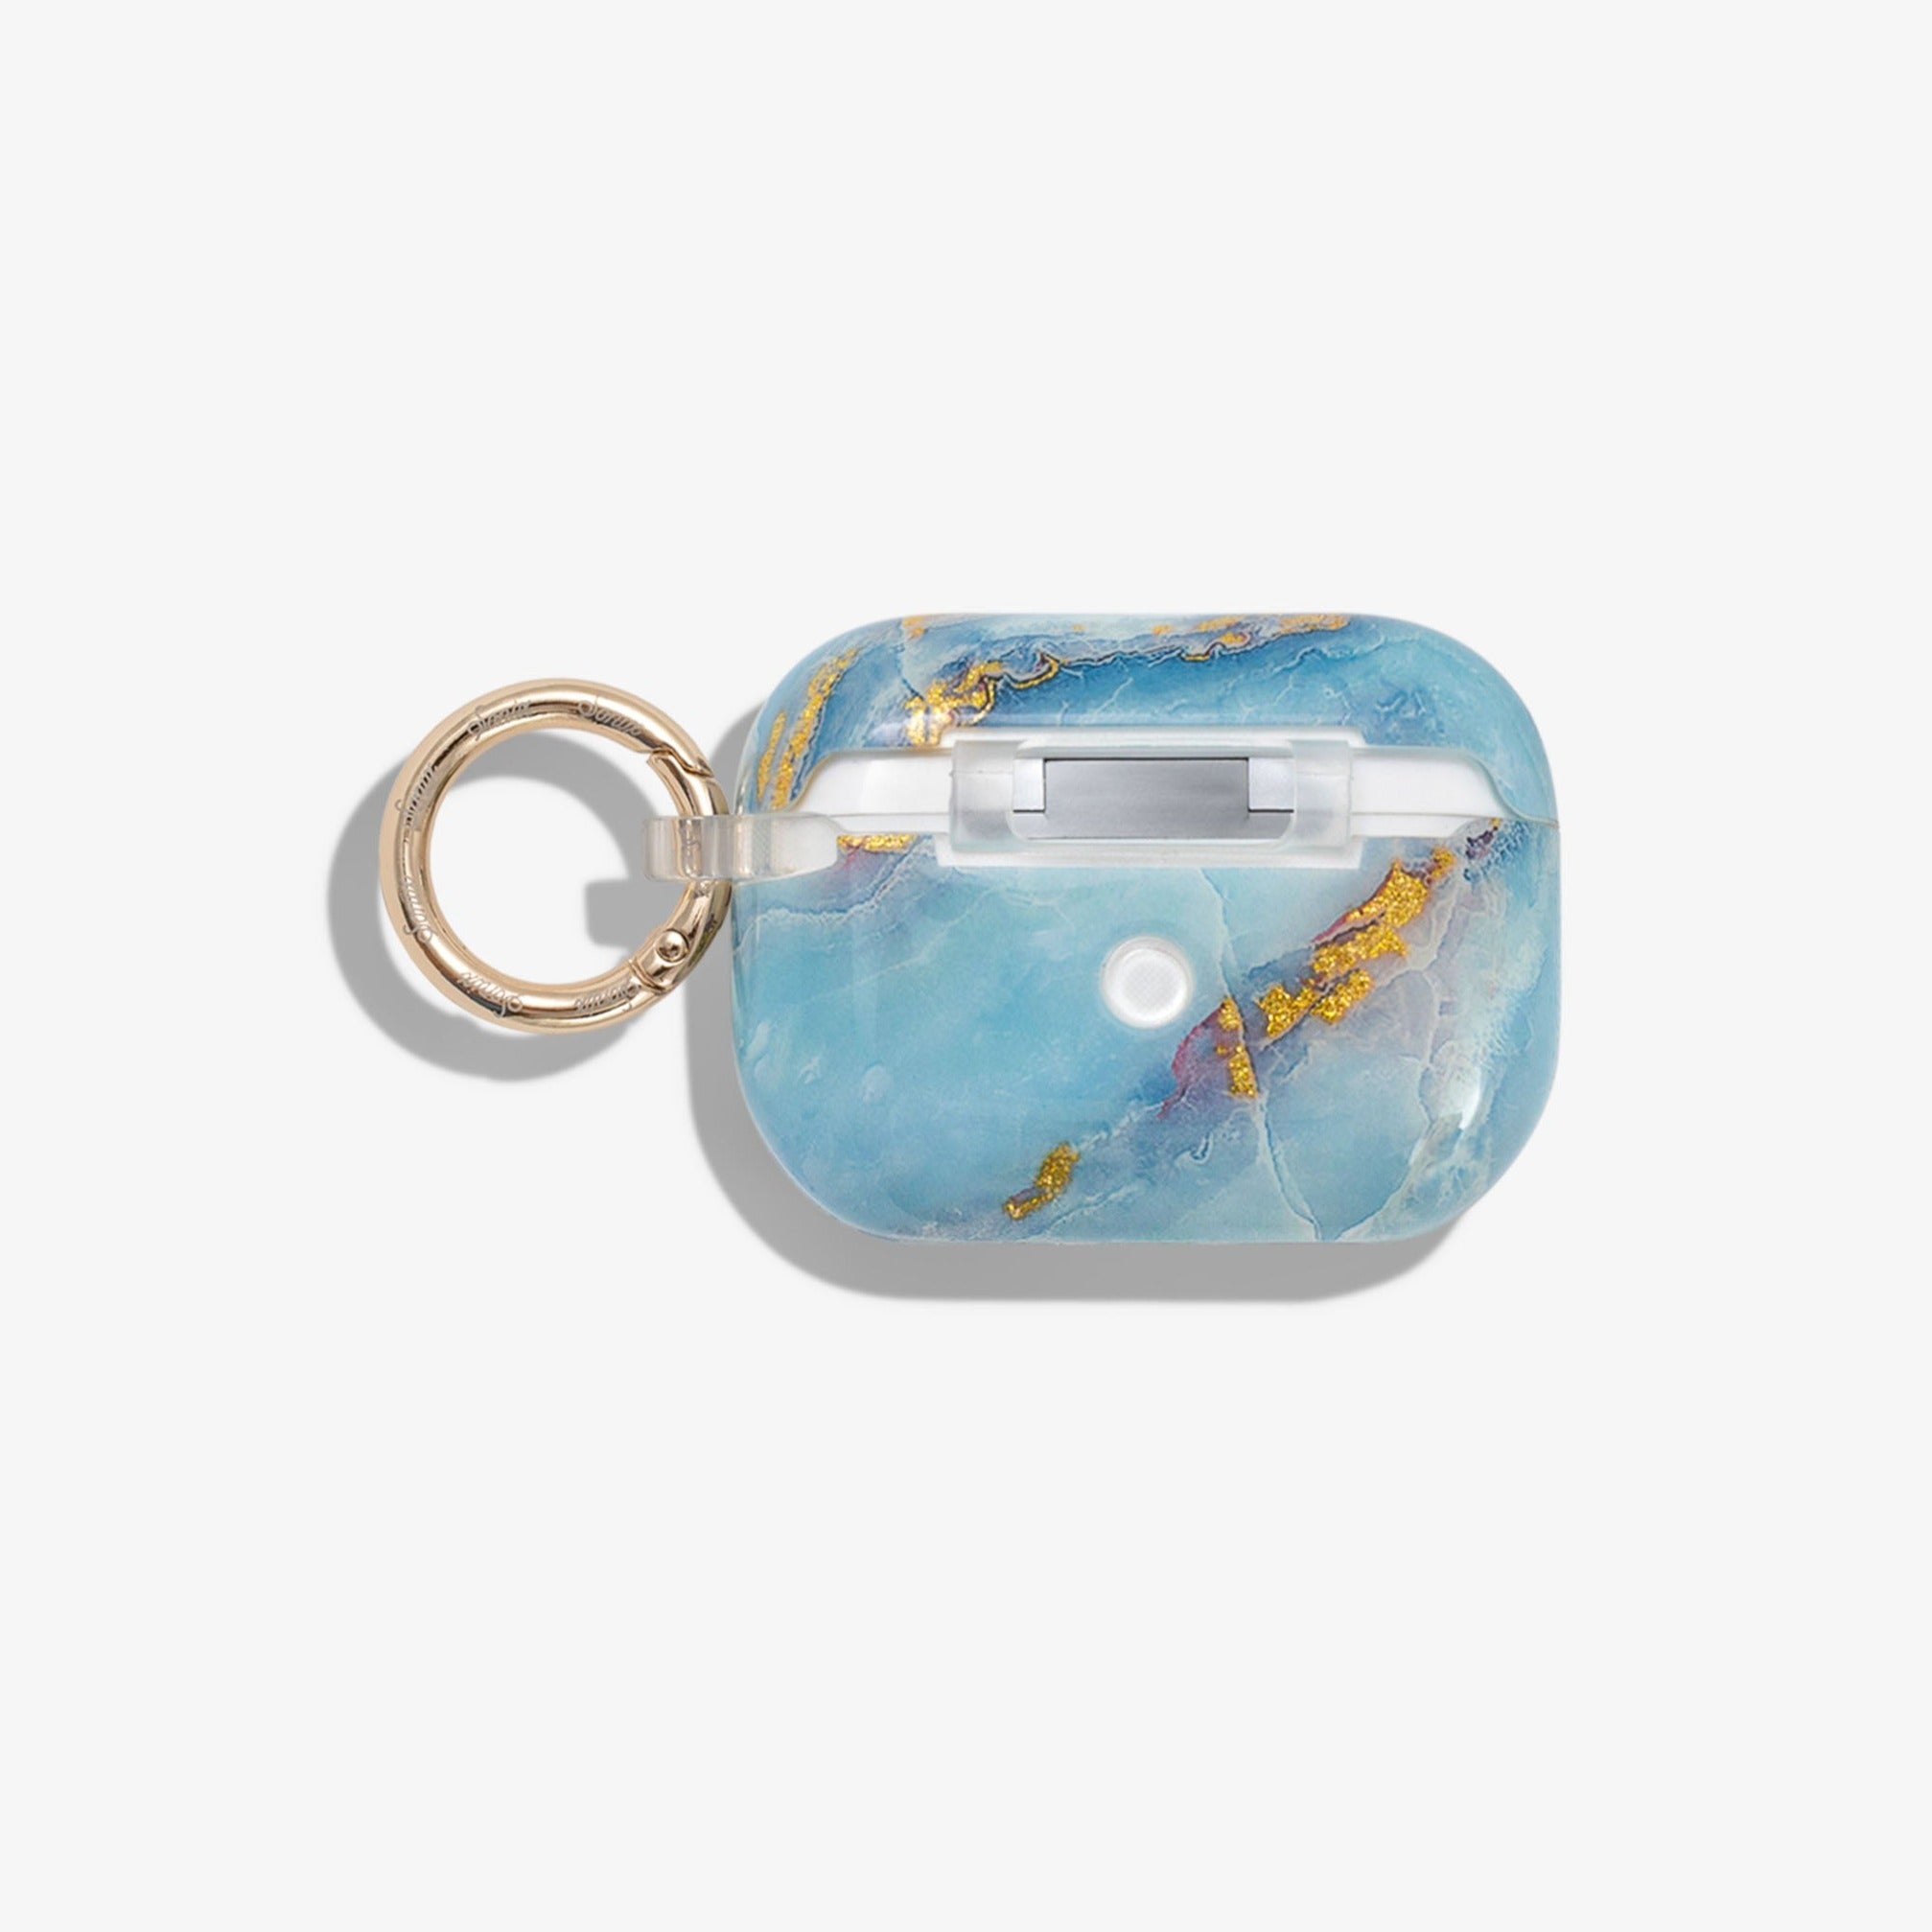 Ice Blue Marble AirPods Case